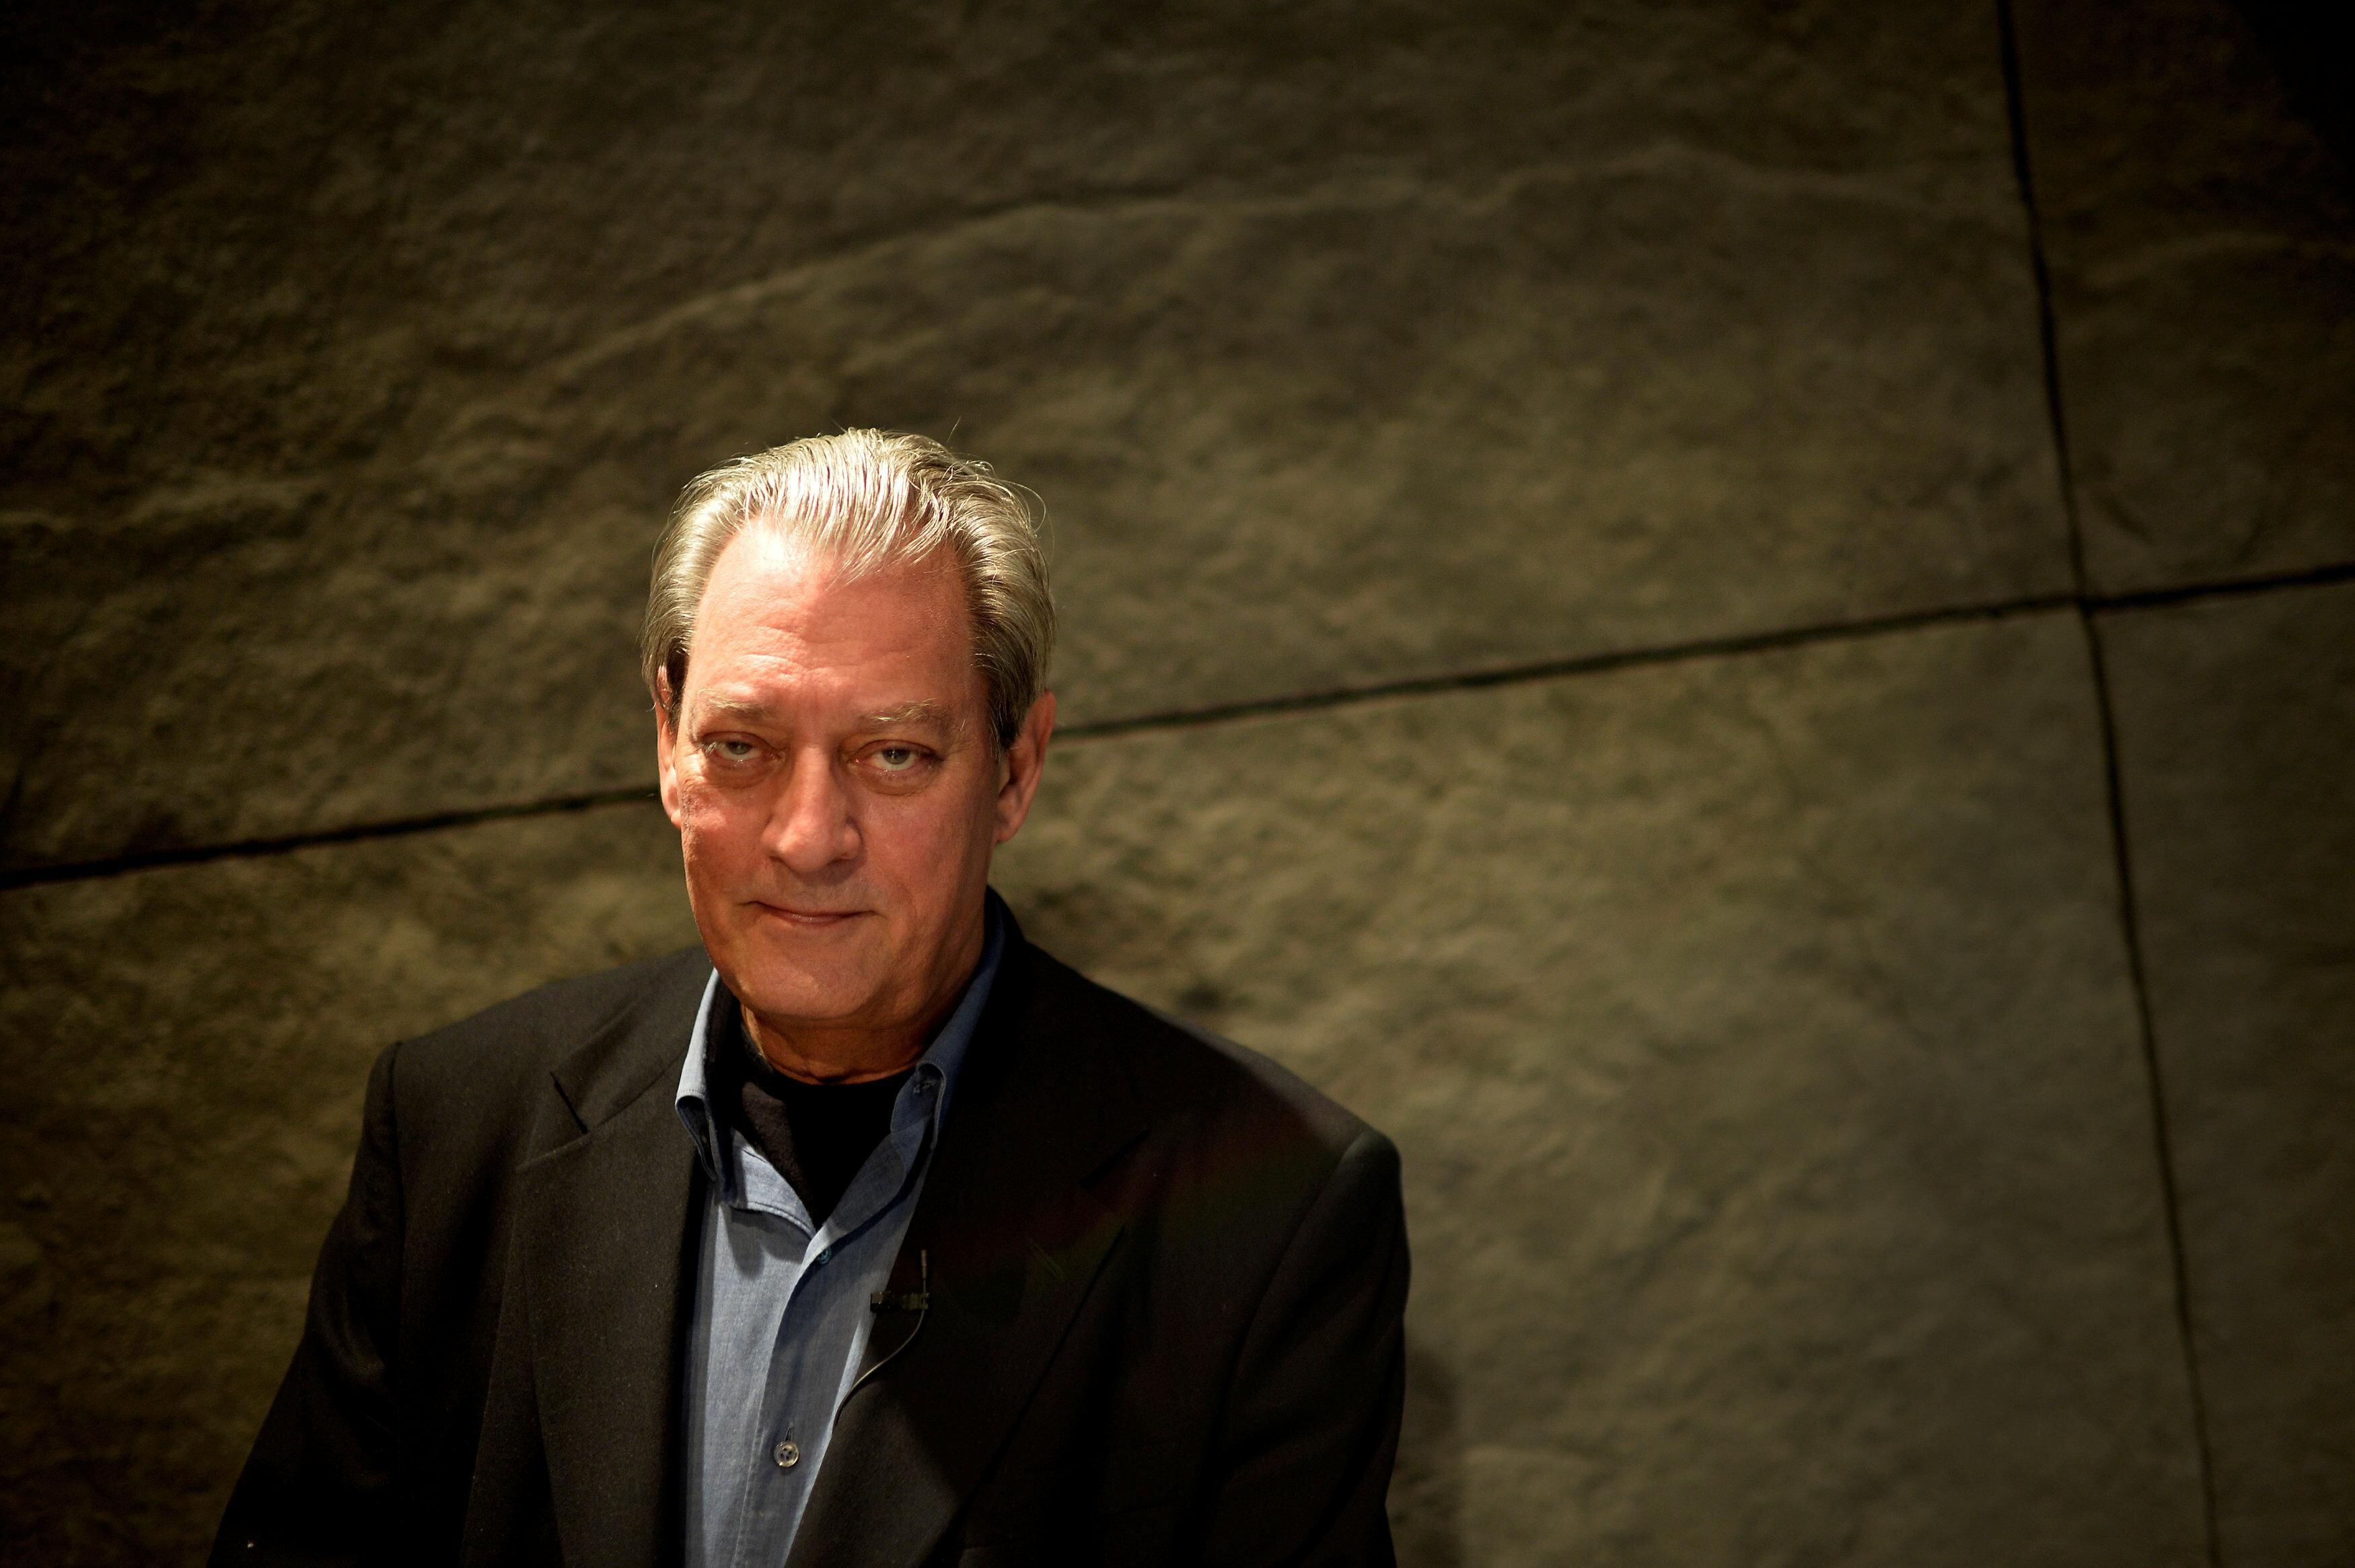 Paul Auster  The Booker Prizes